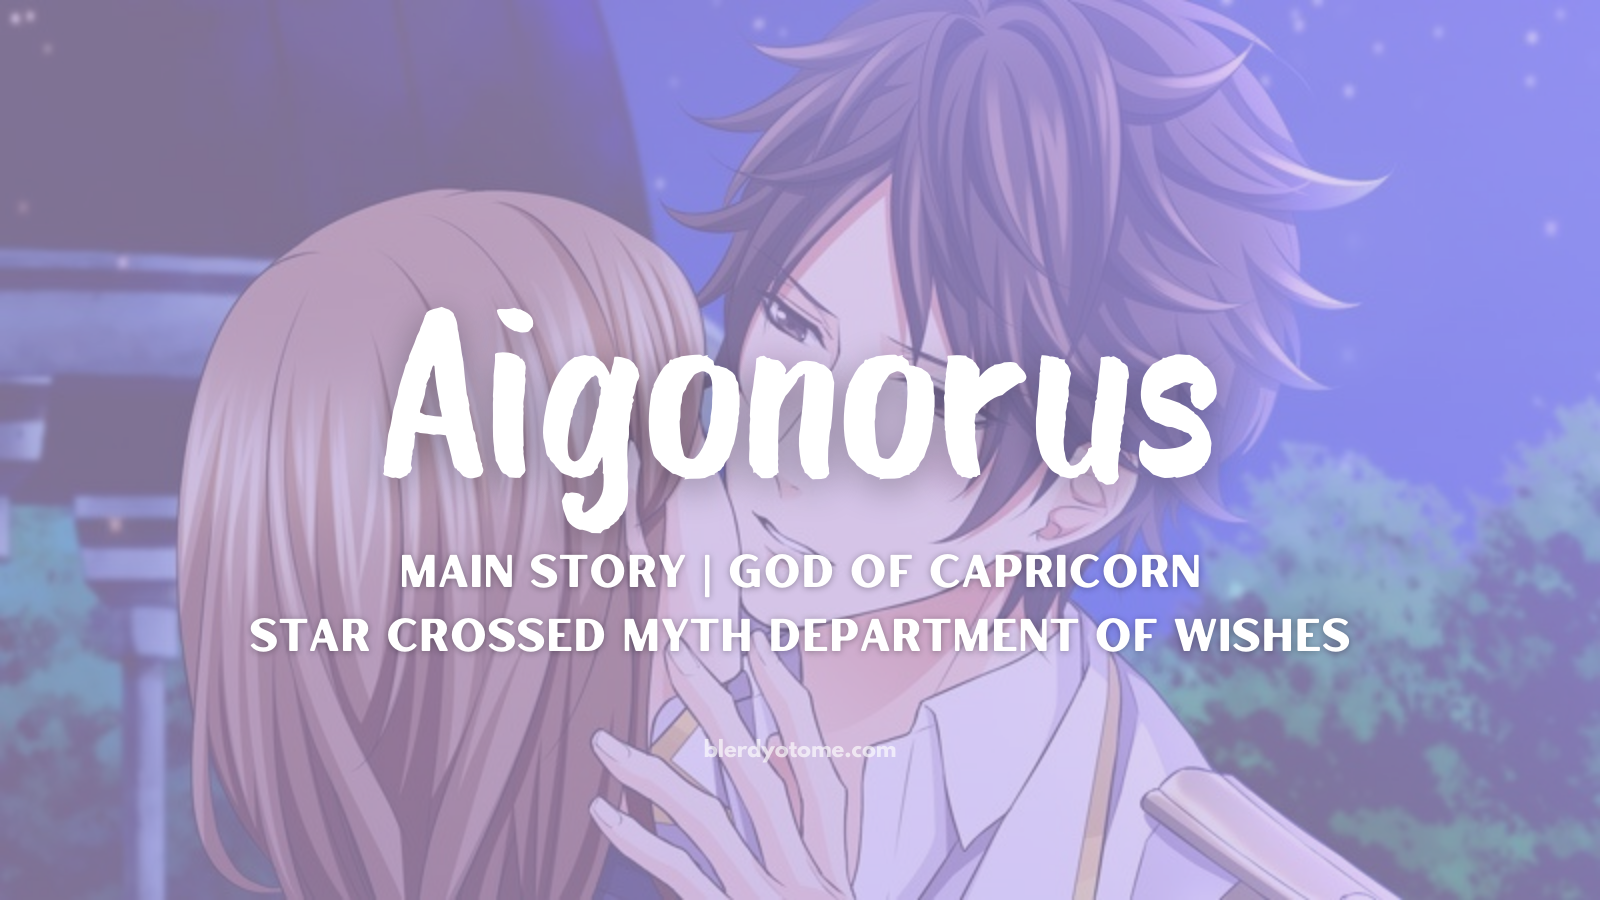 Star Crossed Myth | Aigonorus Review: My Lover is an Apathetic God